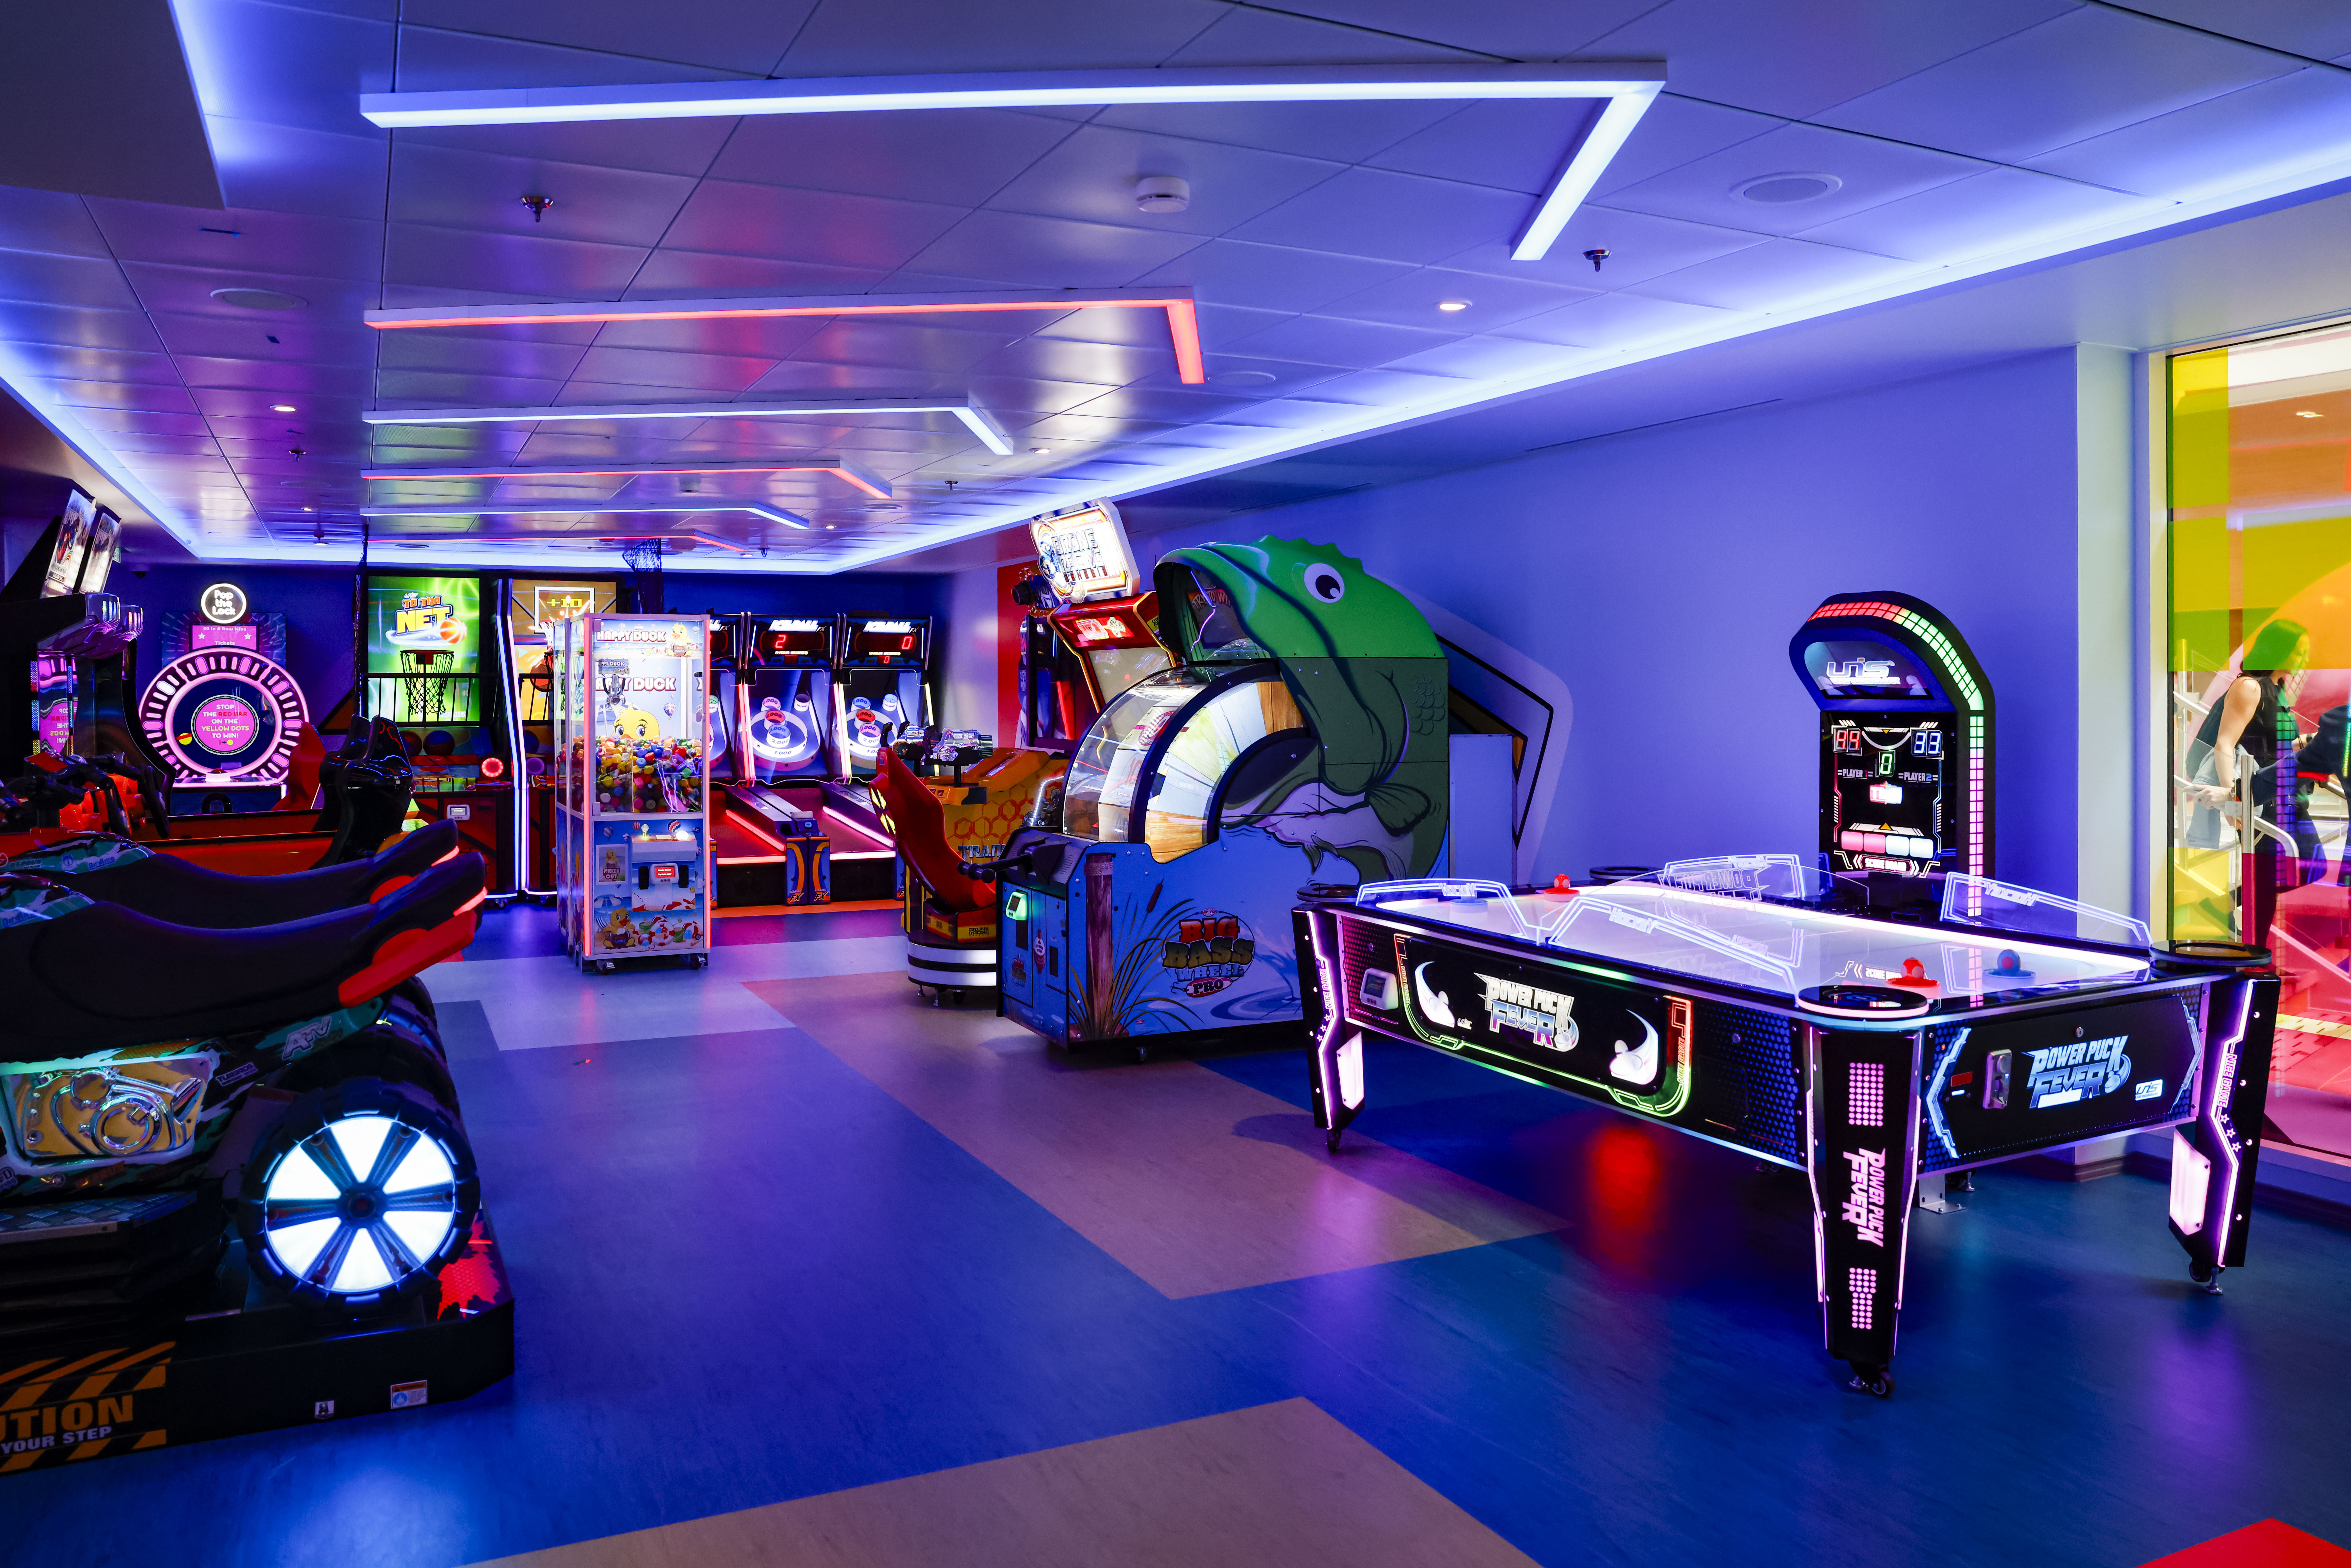 Guests can also use an arcade that has an air hockey table